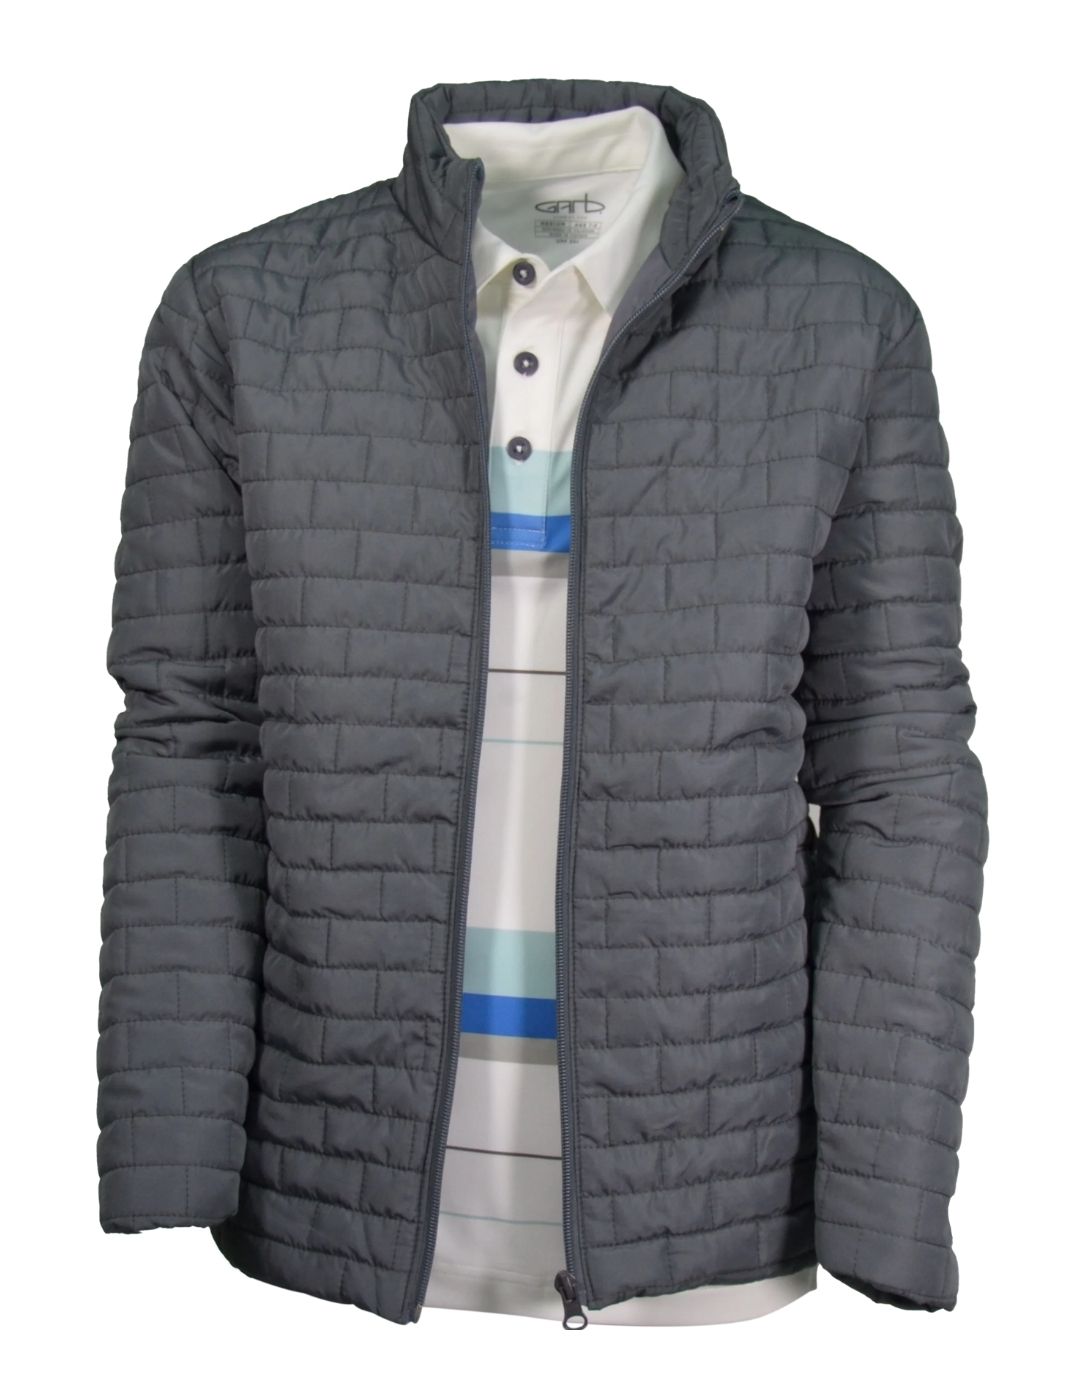 Larry Toddler Boys' Quilted Jacket